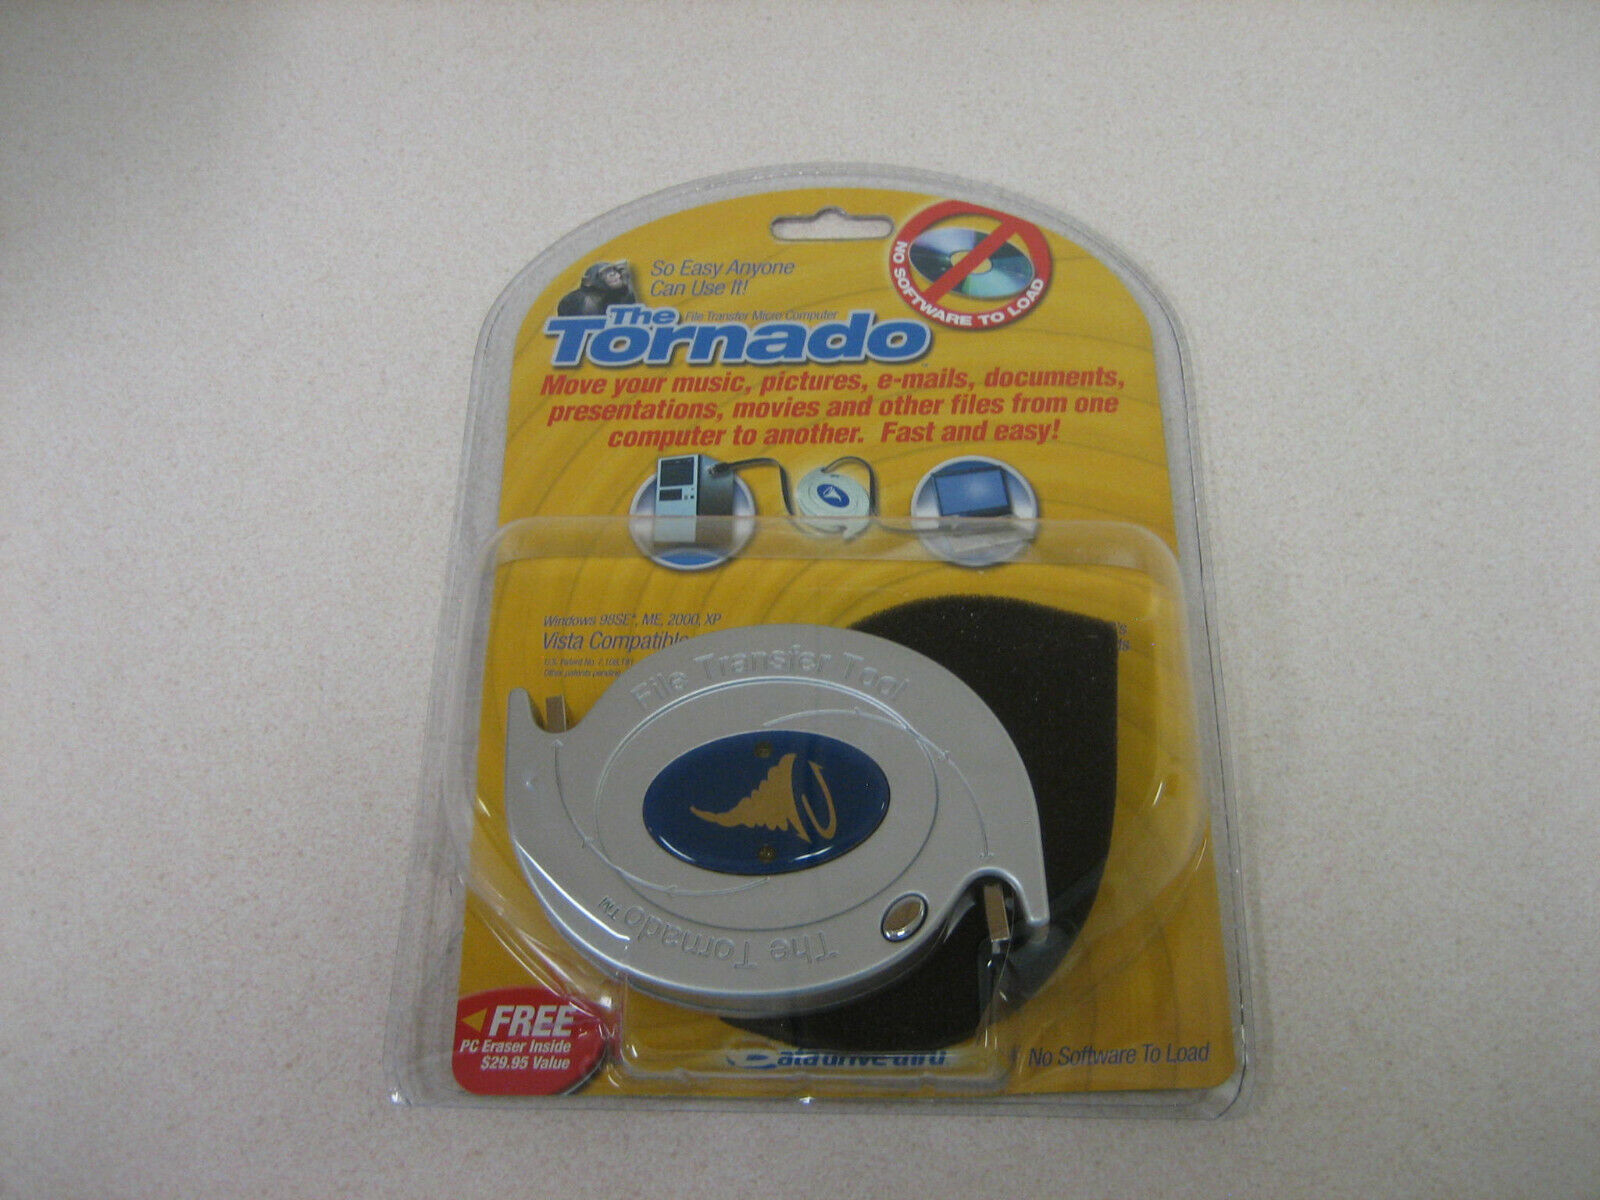 The Tornado PC to PC Data Transfer Device/File Transfer Tool/USB Data Cable 